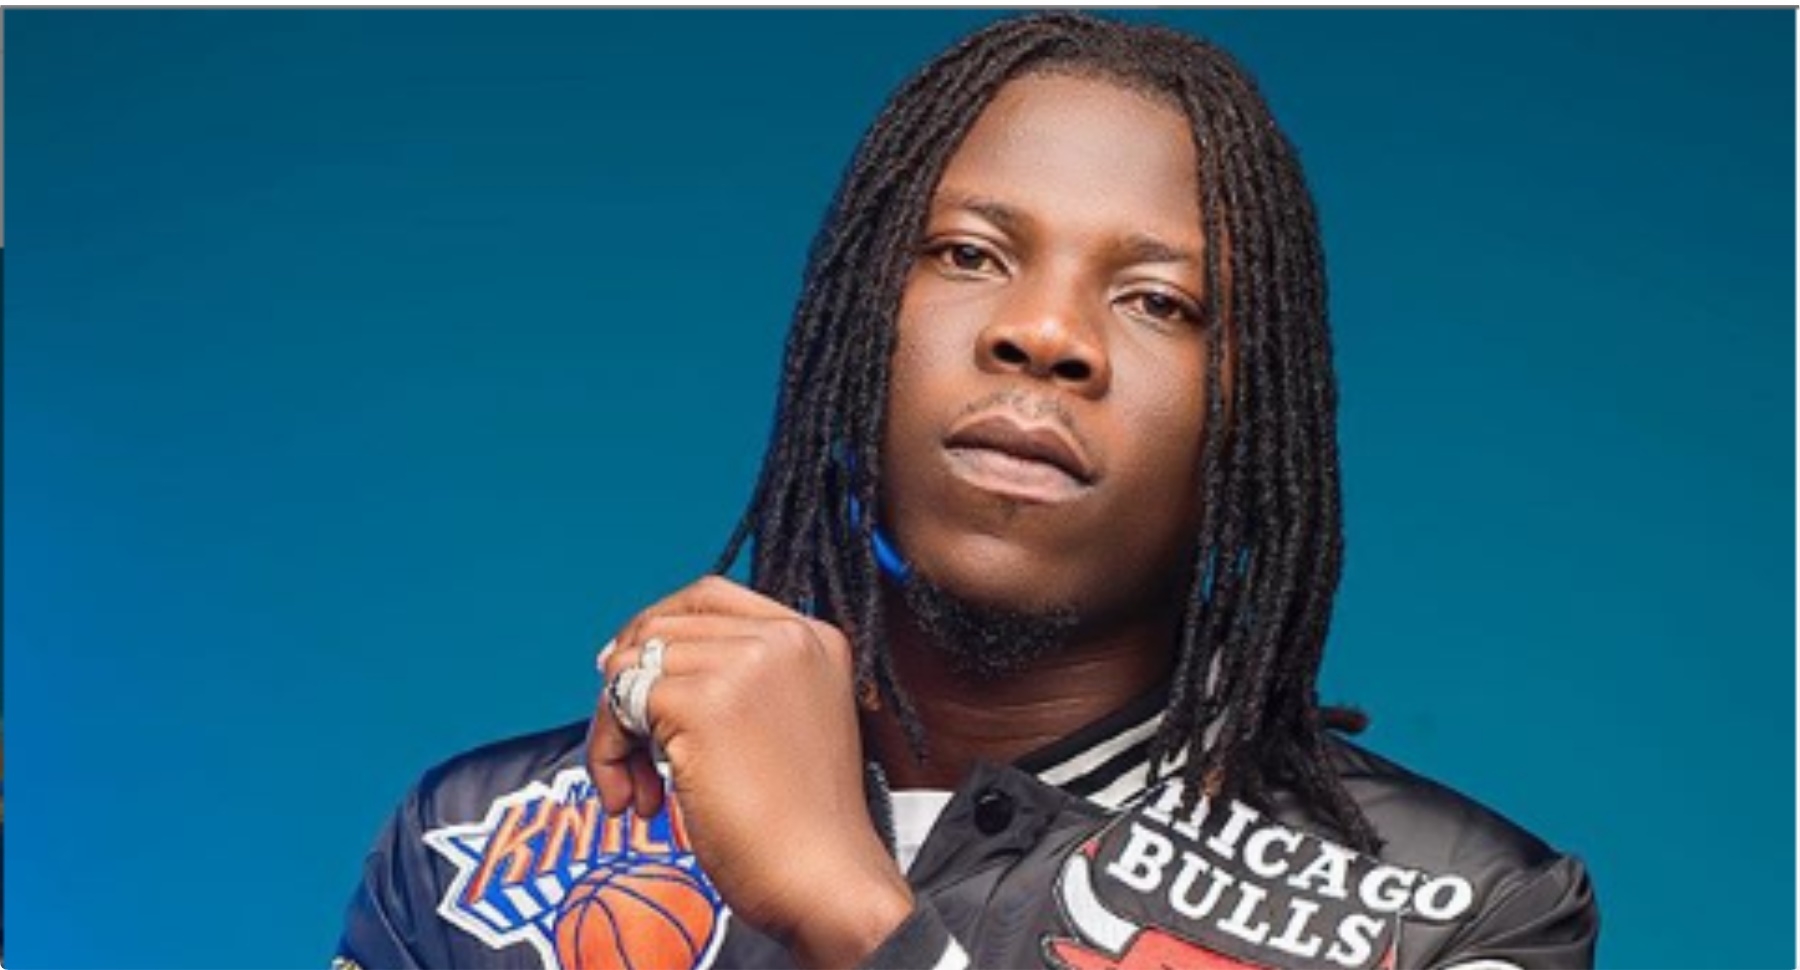 Stonebwoy set to venture into books, films and other new fields